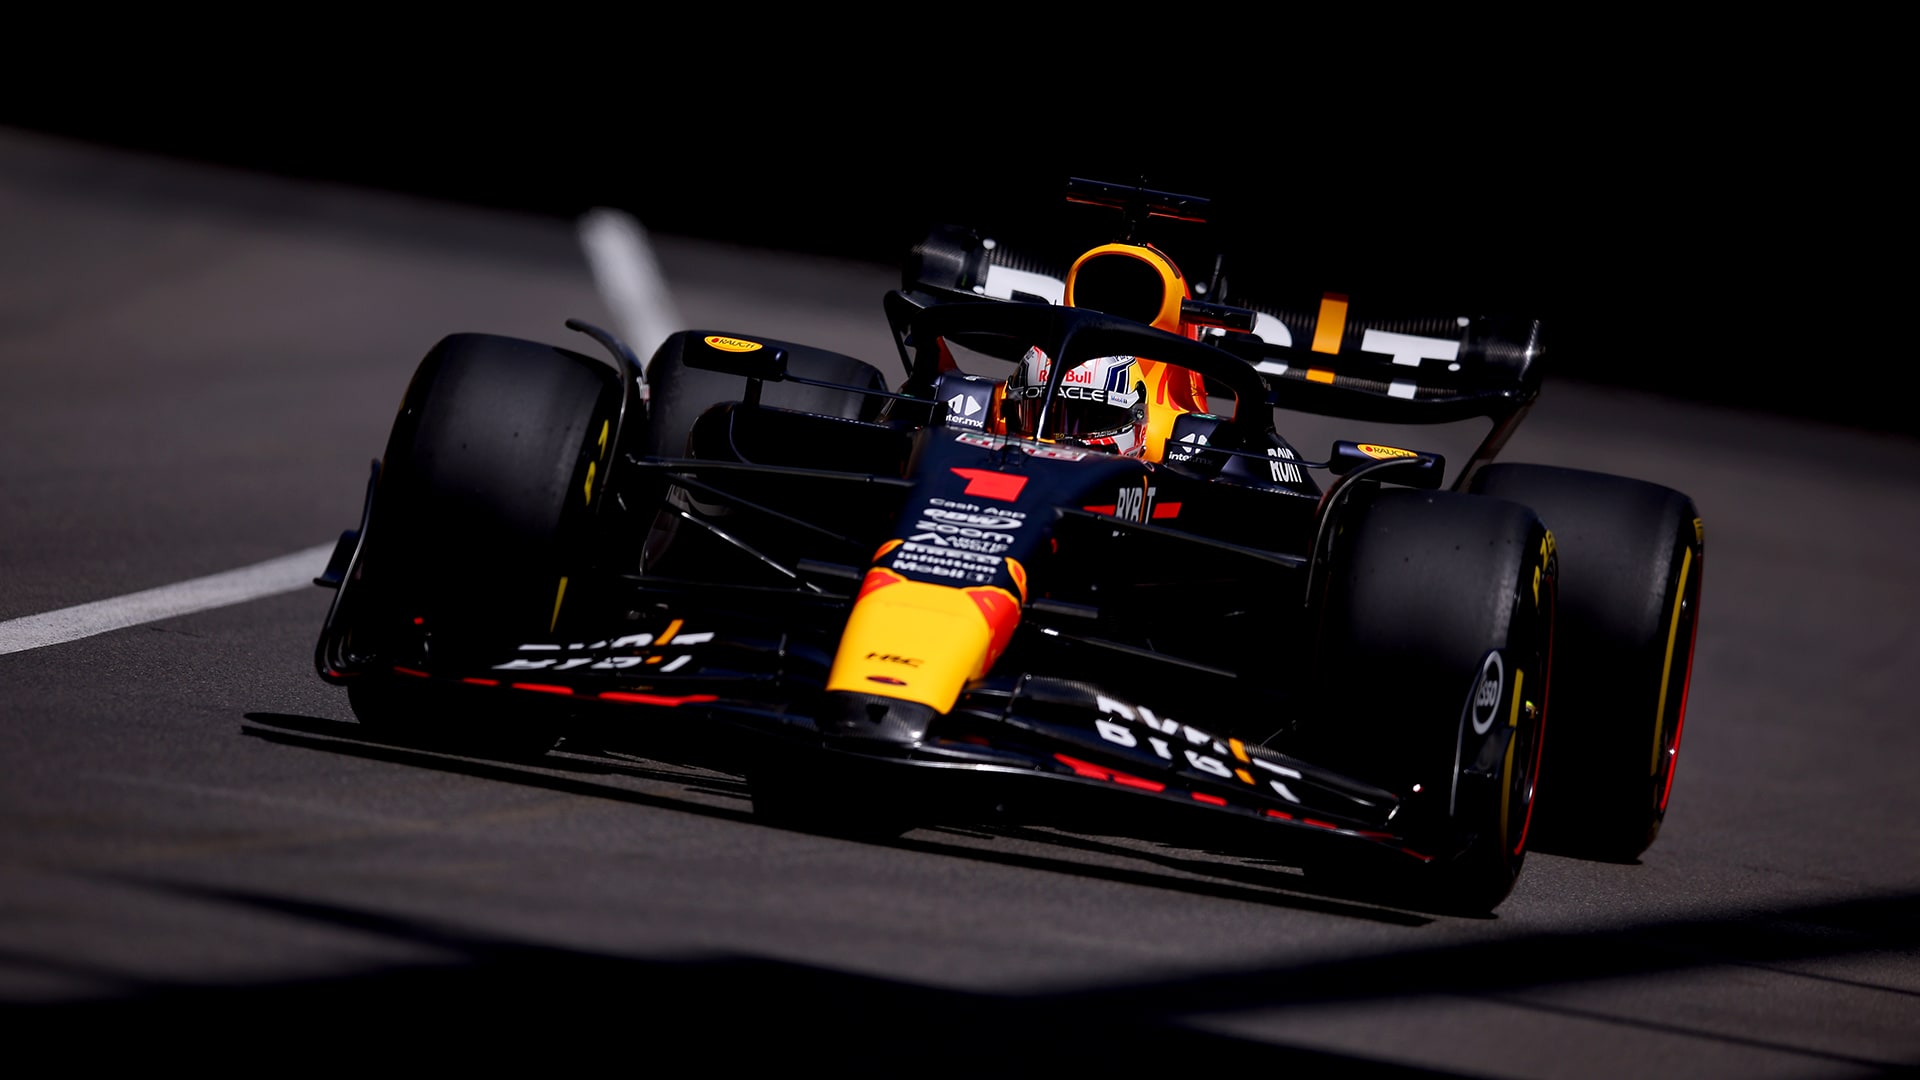 2023 Monaco Grand Prix FP2 report and highlights Verstappen leads Leclerc while Sainz crashes during ultra-close second practice in Monaco Formula 1 ®